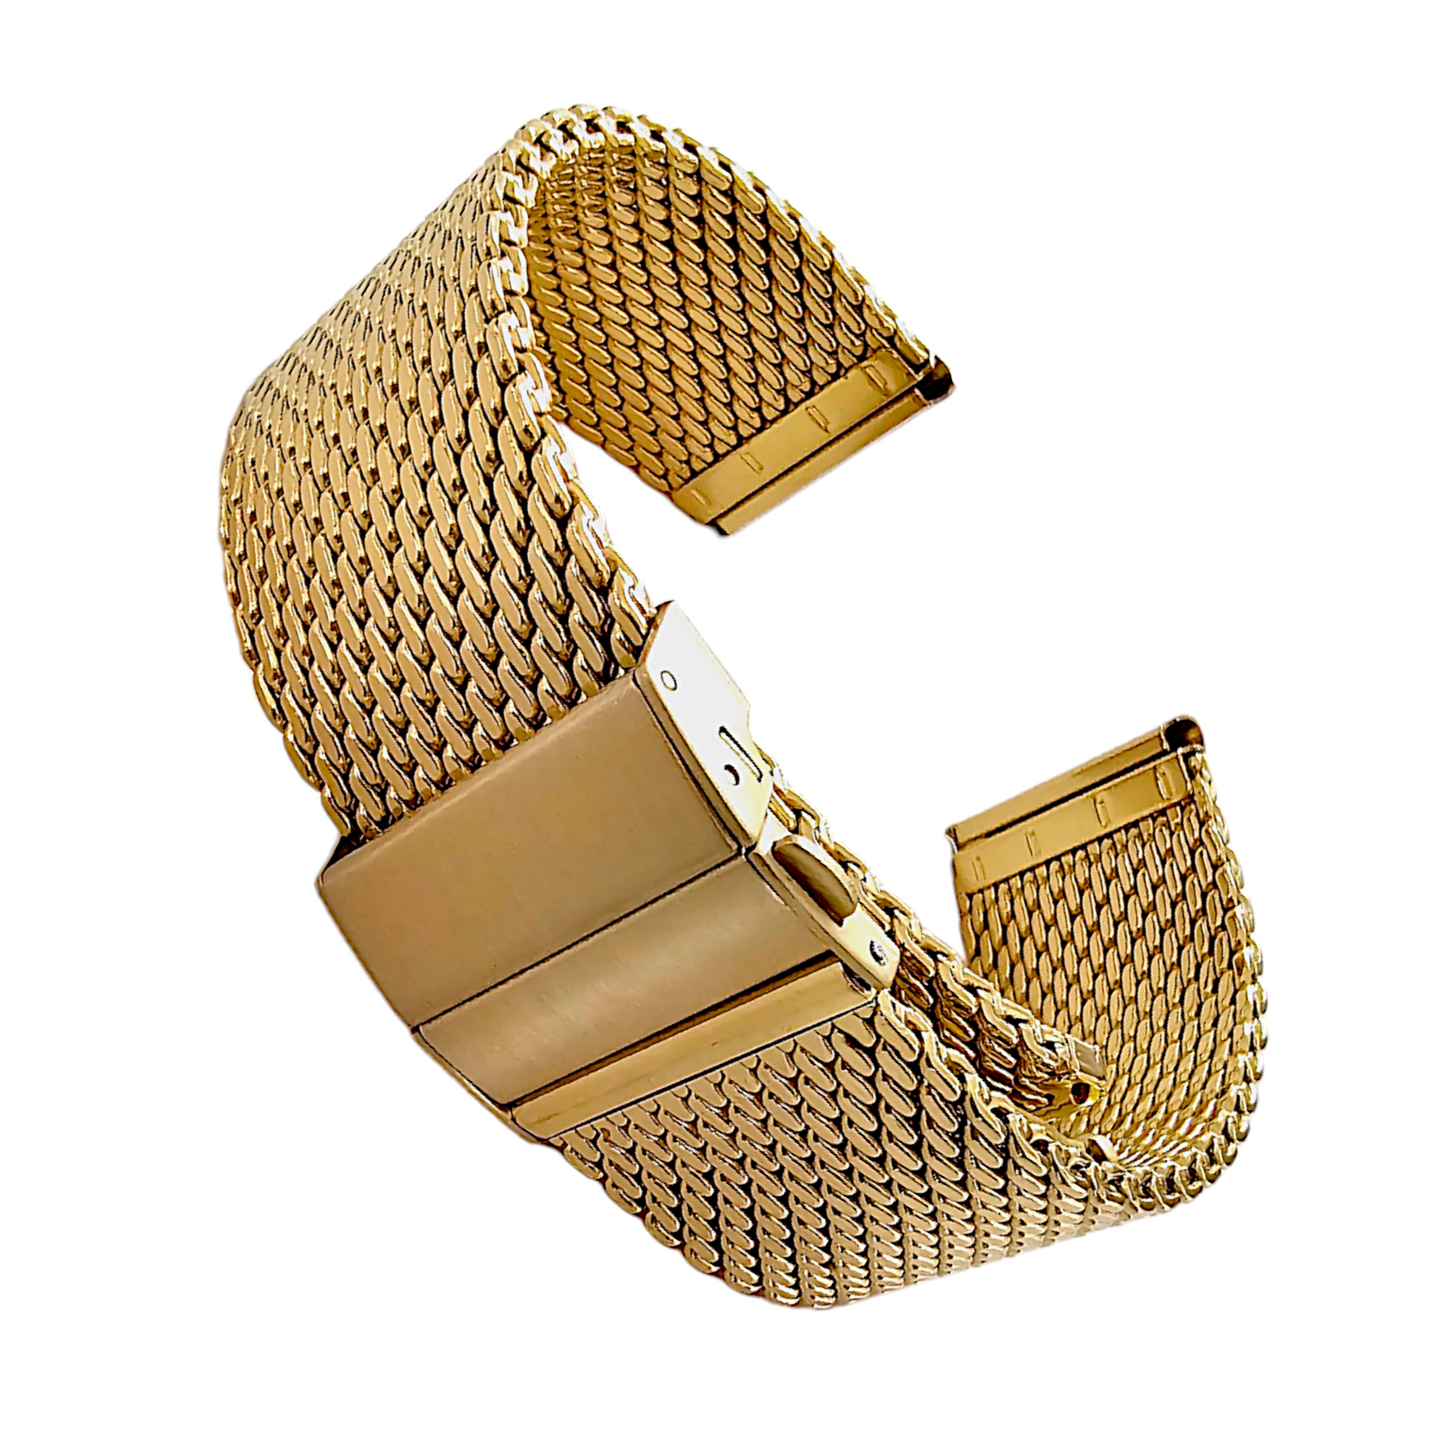 Shark Mesh High Quality 2.7mm Thick Milanese Watch Strap Band Gold 18 20 22 mm